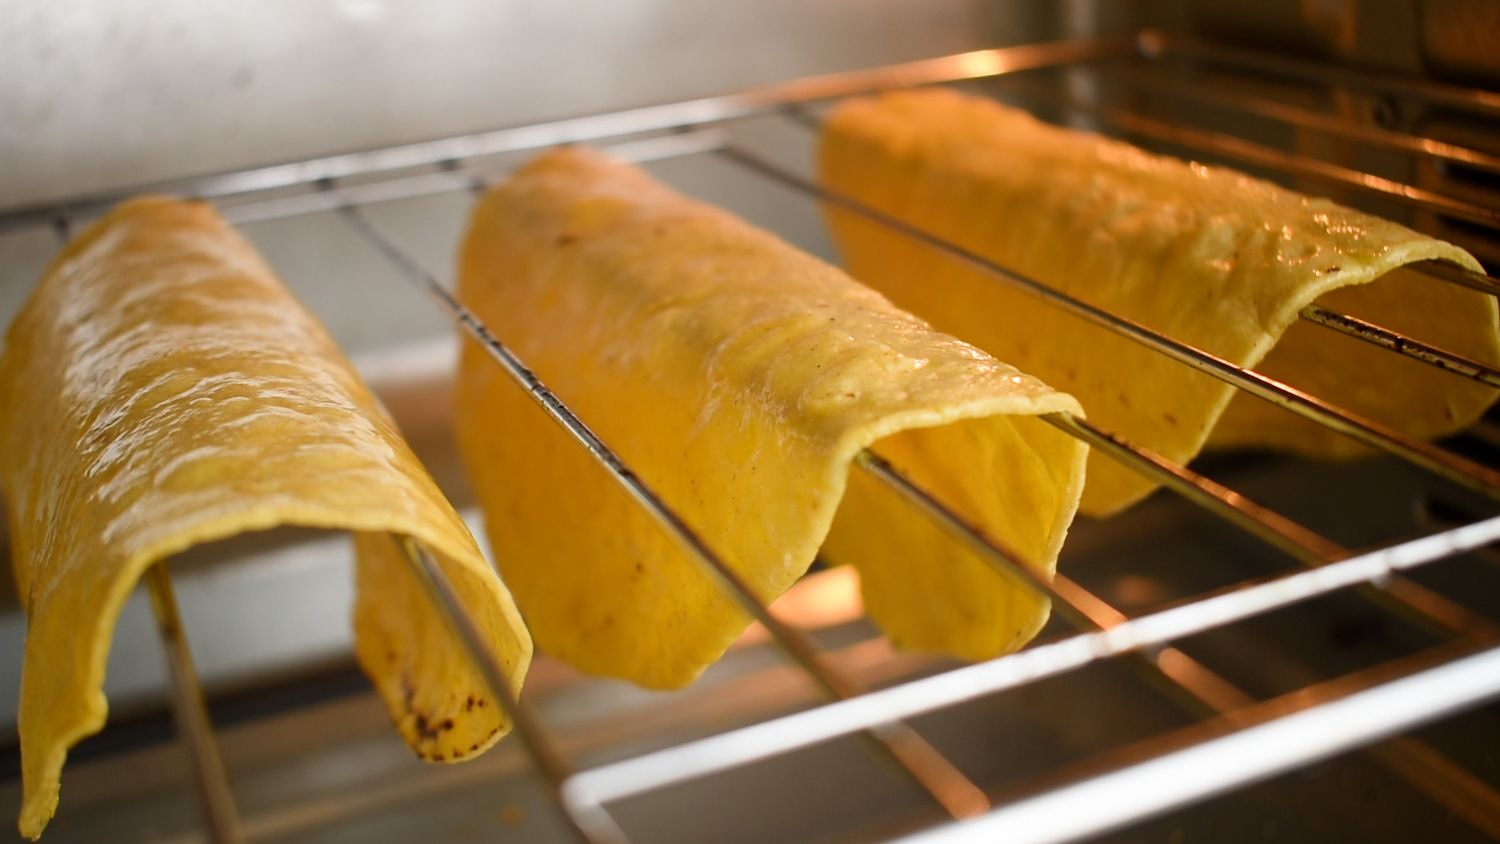 Corn tortillas baking in the oven to make taco shells that are draped over the oven rack.